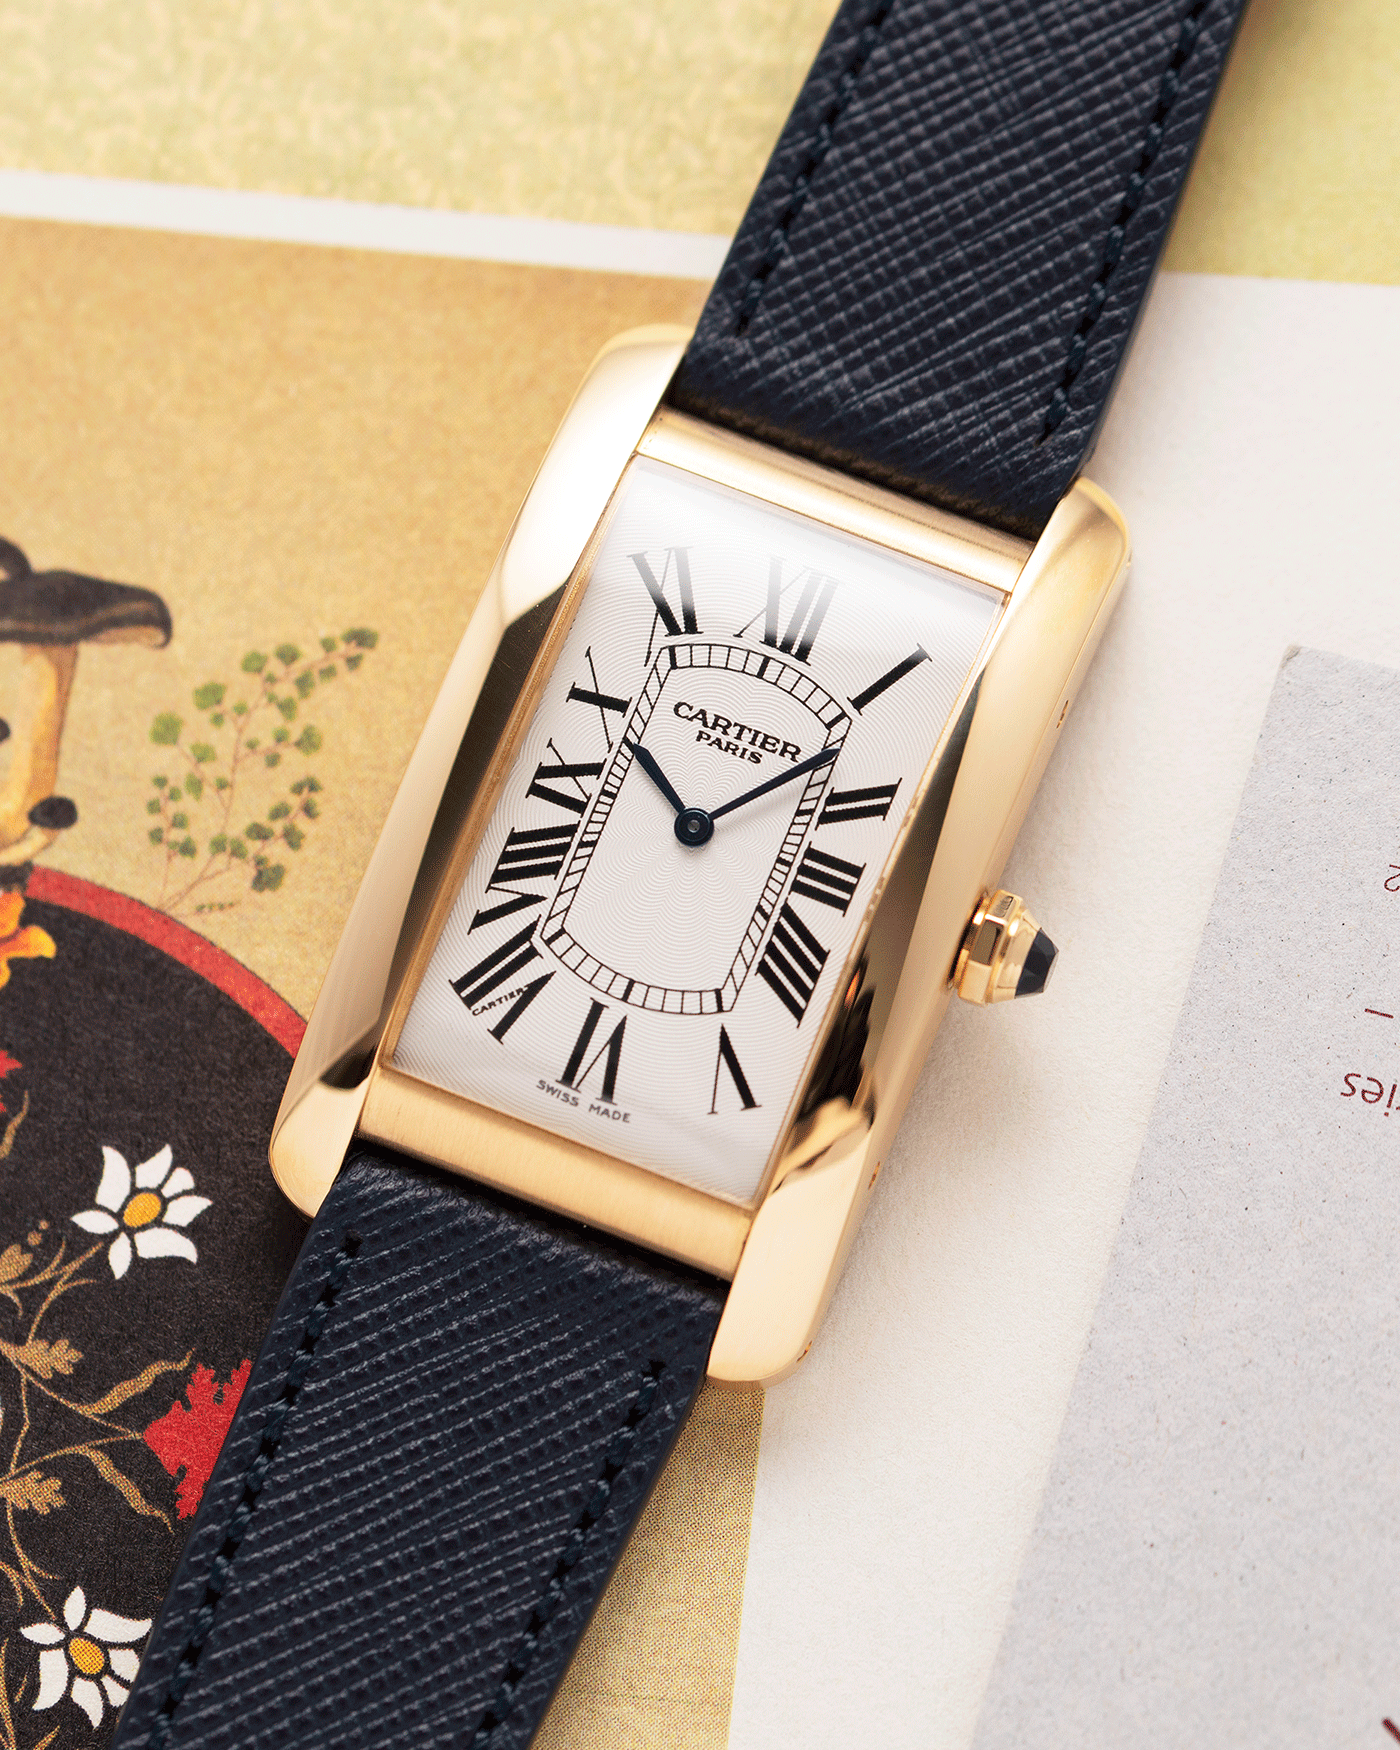 Brand: Cartier Year: 1990s Model: CPCP Collection Prive Tank Americaine Reference: 1735 Material: 18k Yellow Gold Movement: Cartier Caliber 430 MC Case Diameter: 45mm X26mm Strap: Navy Blue Molequin Textured Calf Strap with separate 18k Cartier Yellow Gold Deployant